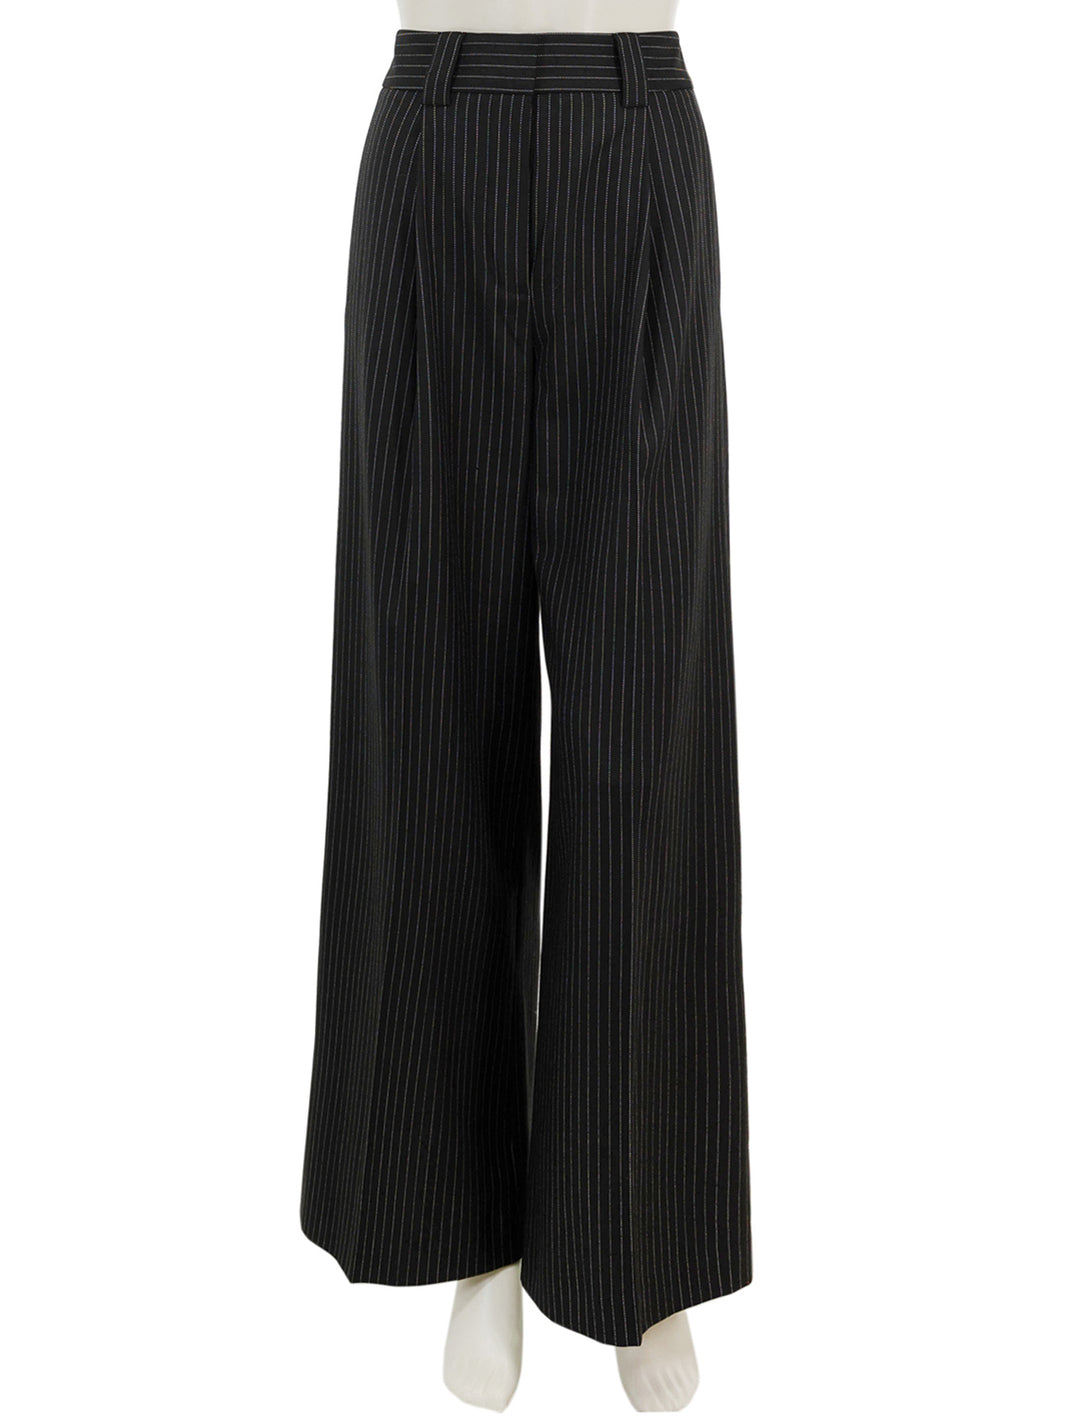 Front view of Saint Art's tiffany mid-rise wideleg trouser in charcoal pinstripe.